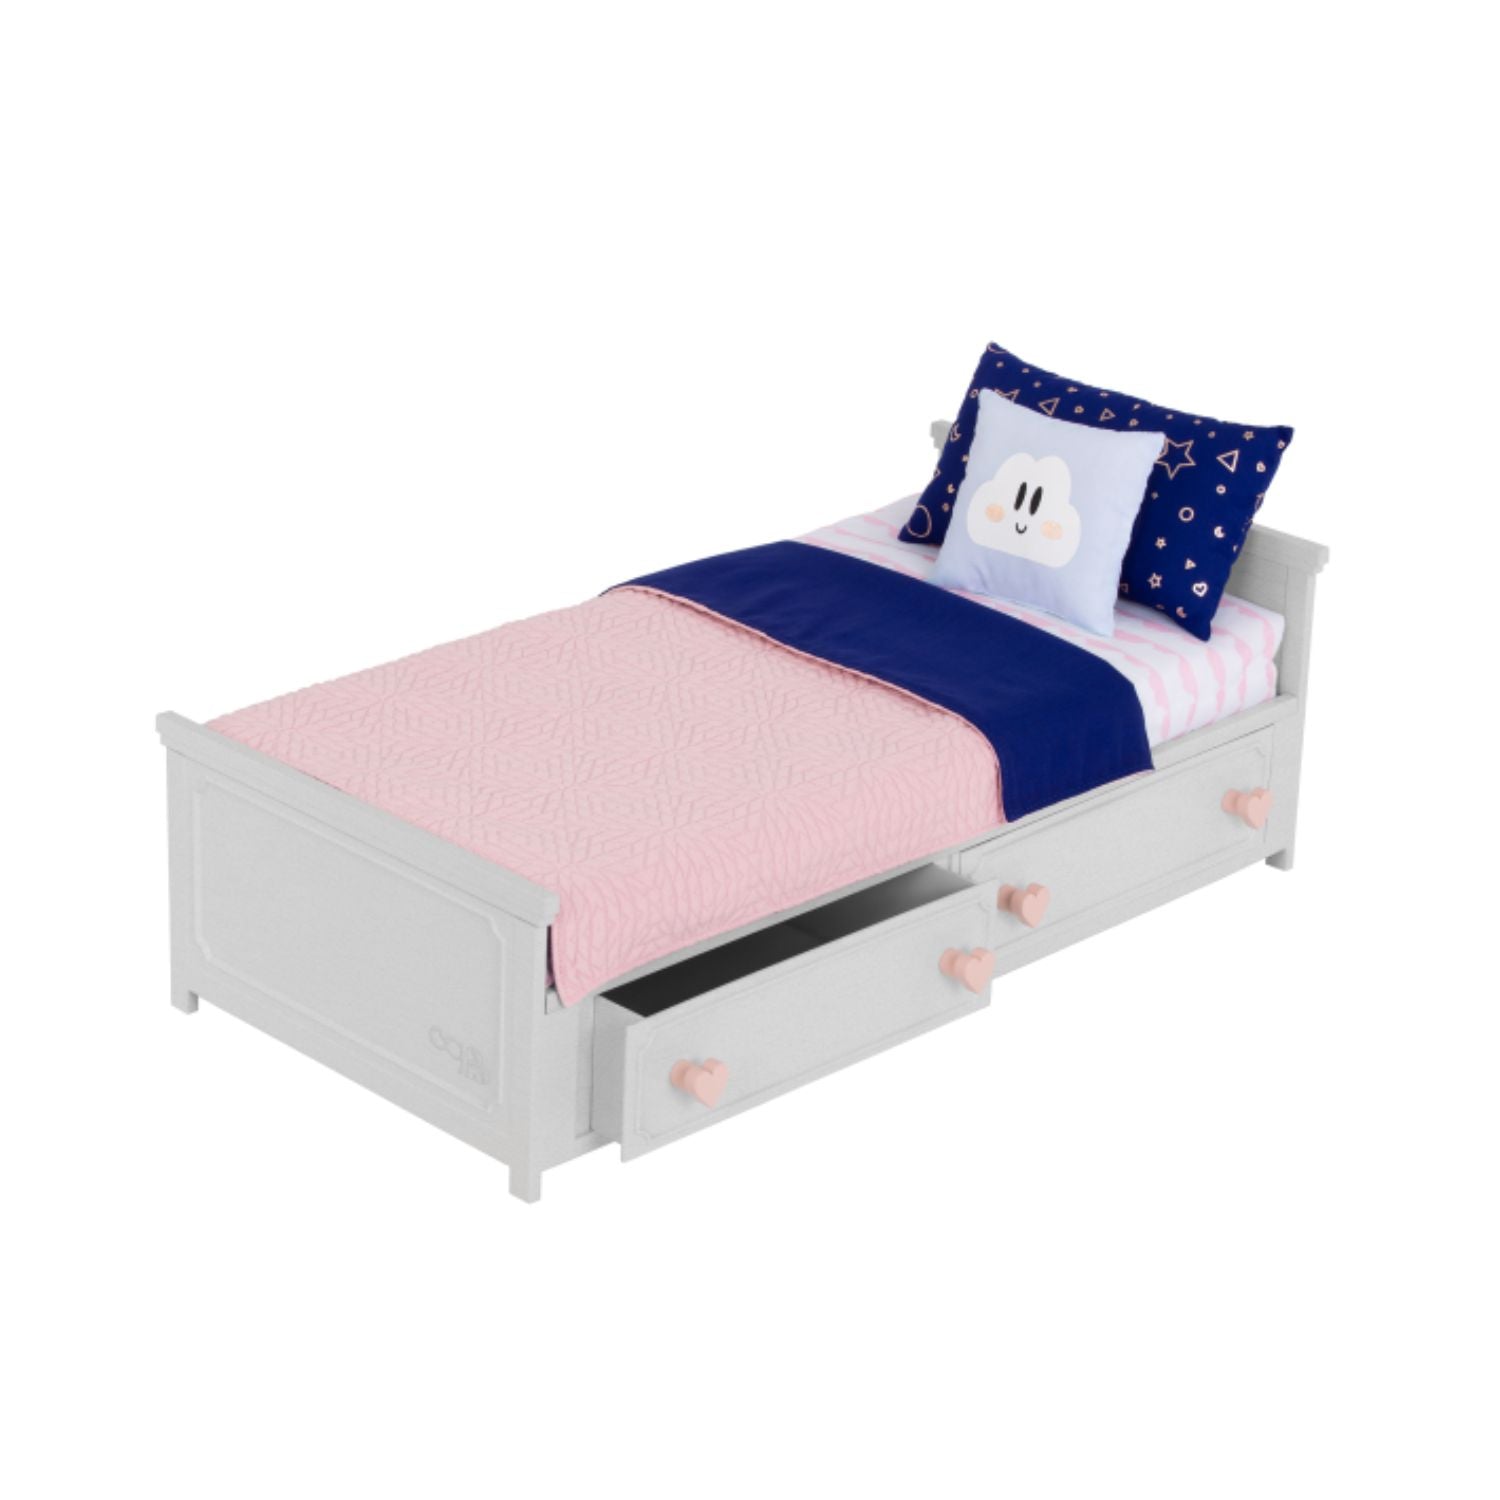 Our Generation Plastic Doll Bed with Built-In Storage Drawers